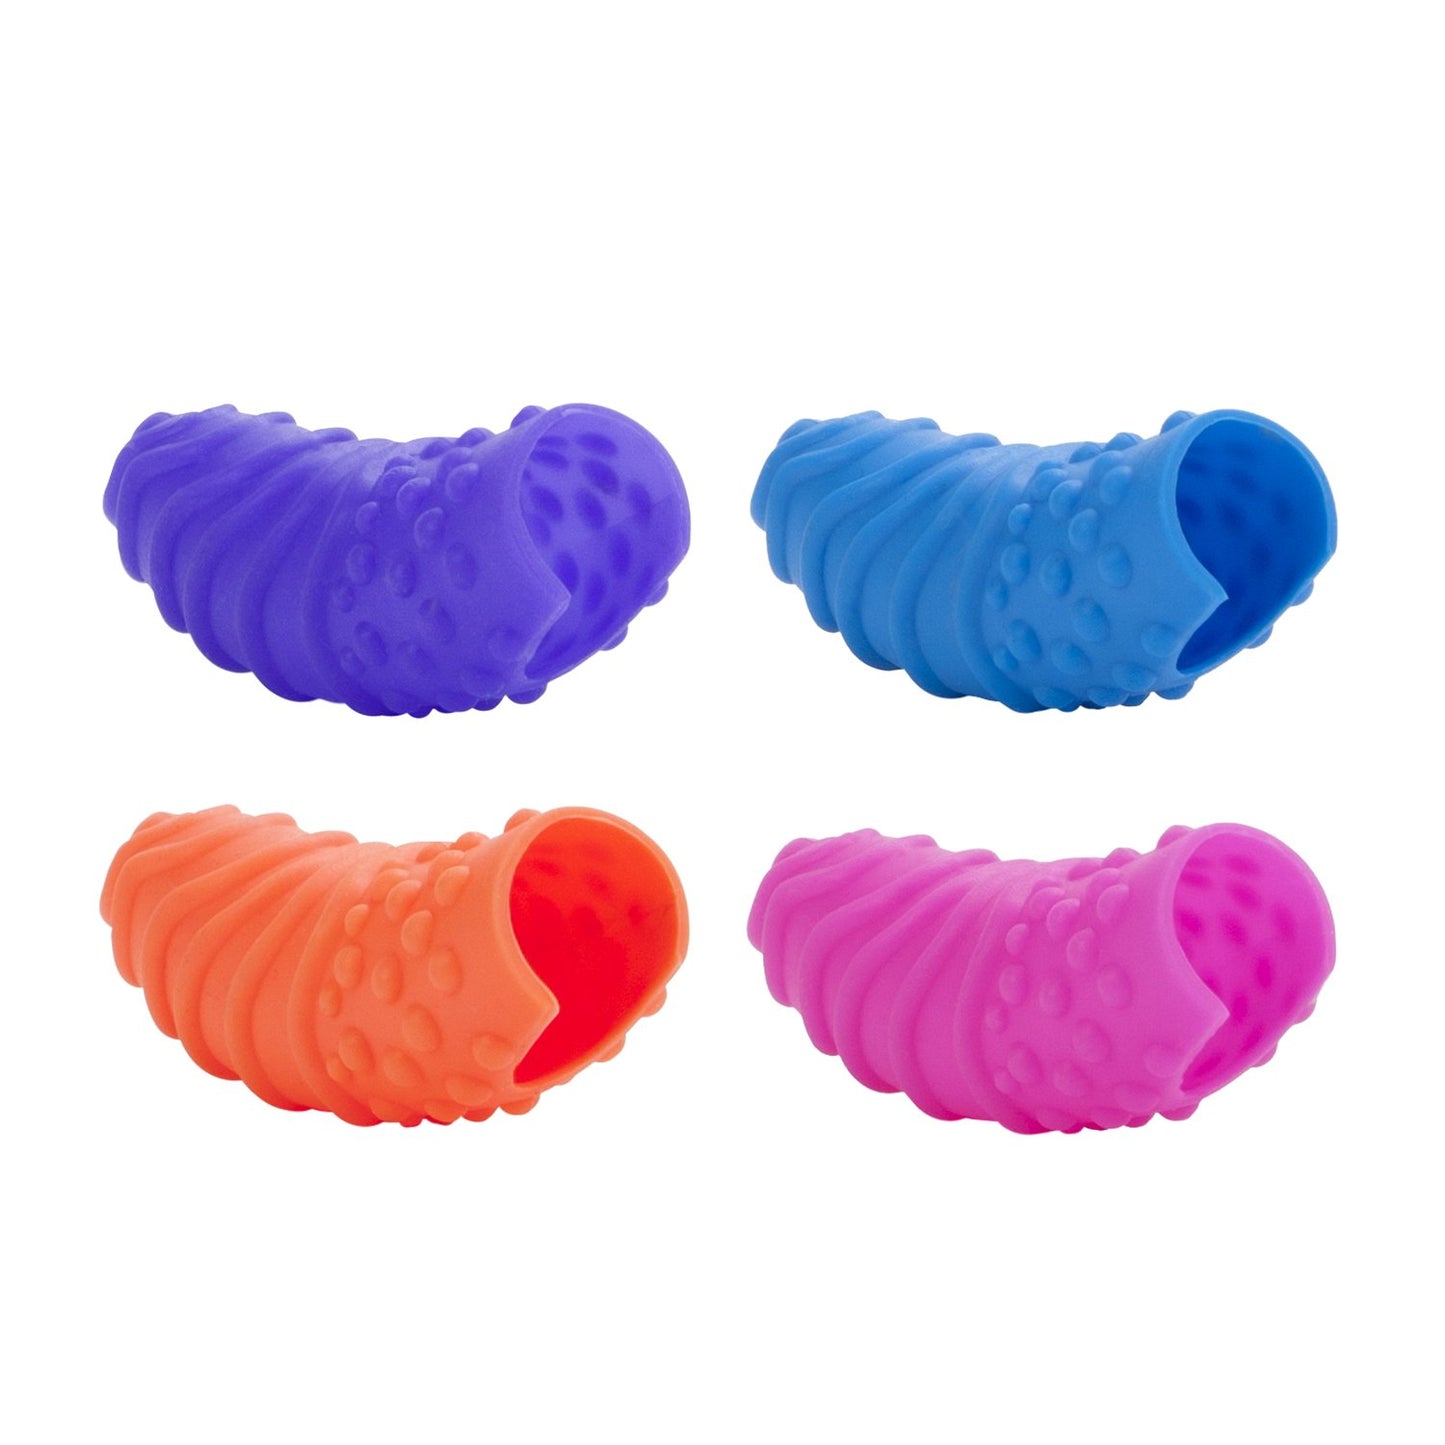 Intimate Play Silicone Finger Swirls